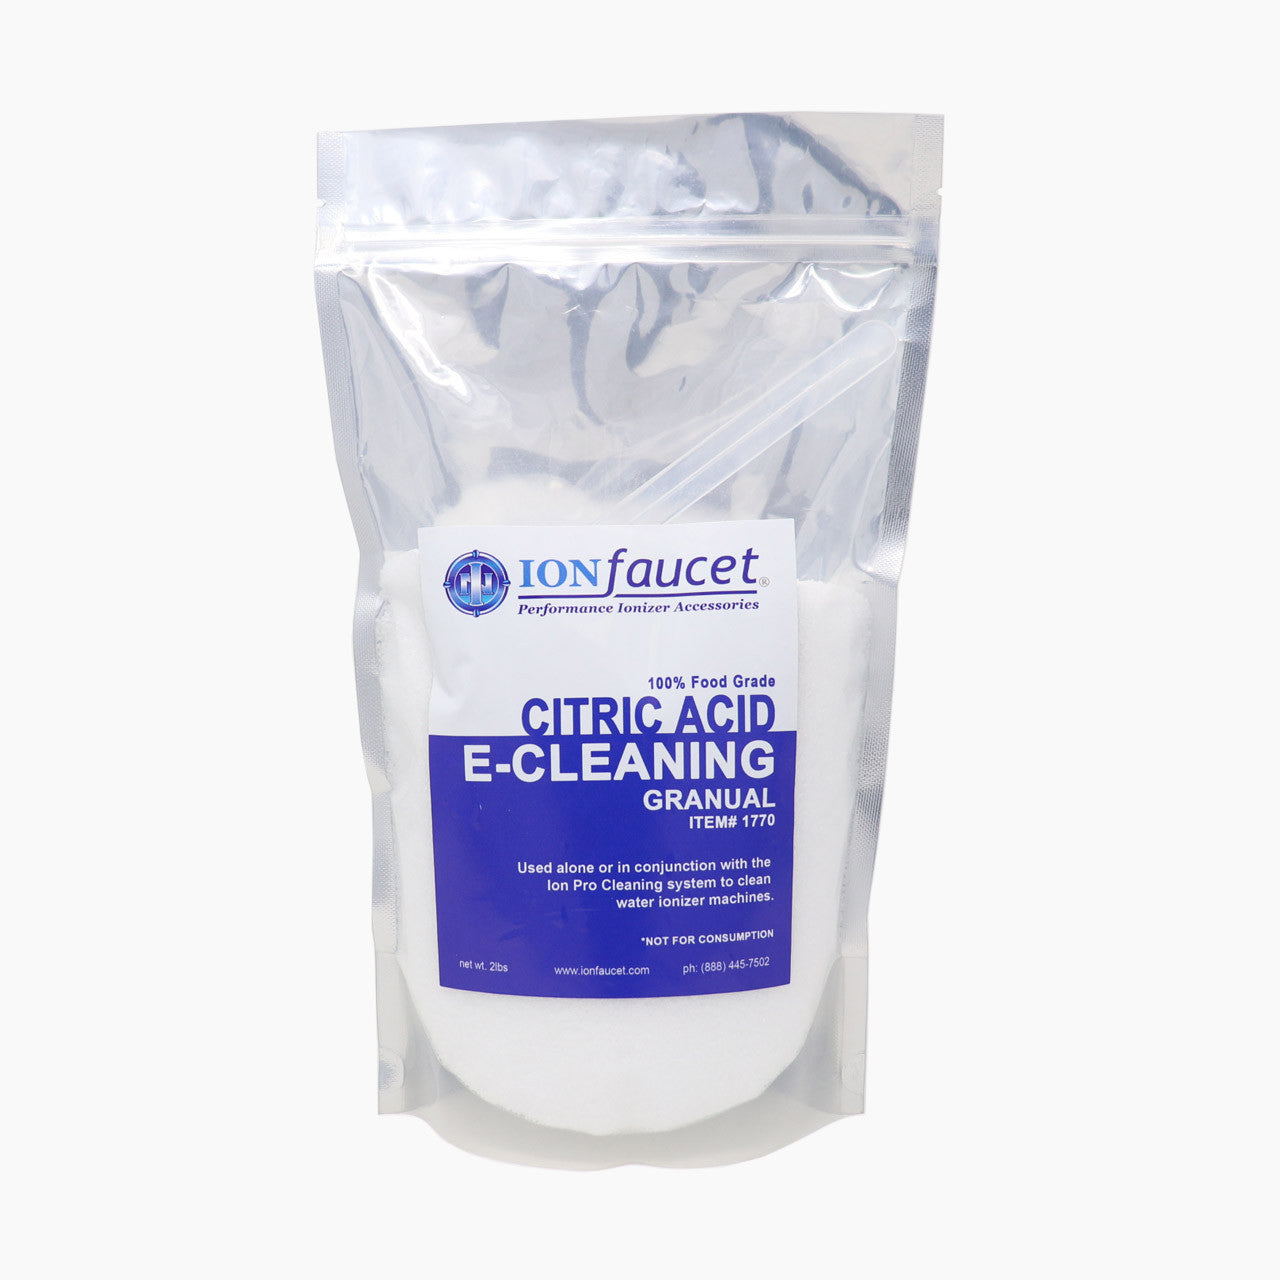 CITRIC ACID E-CLEANING